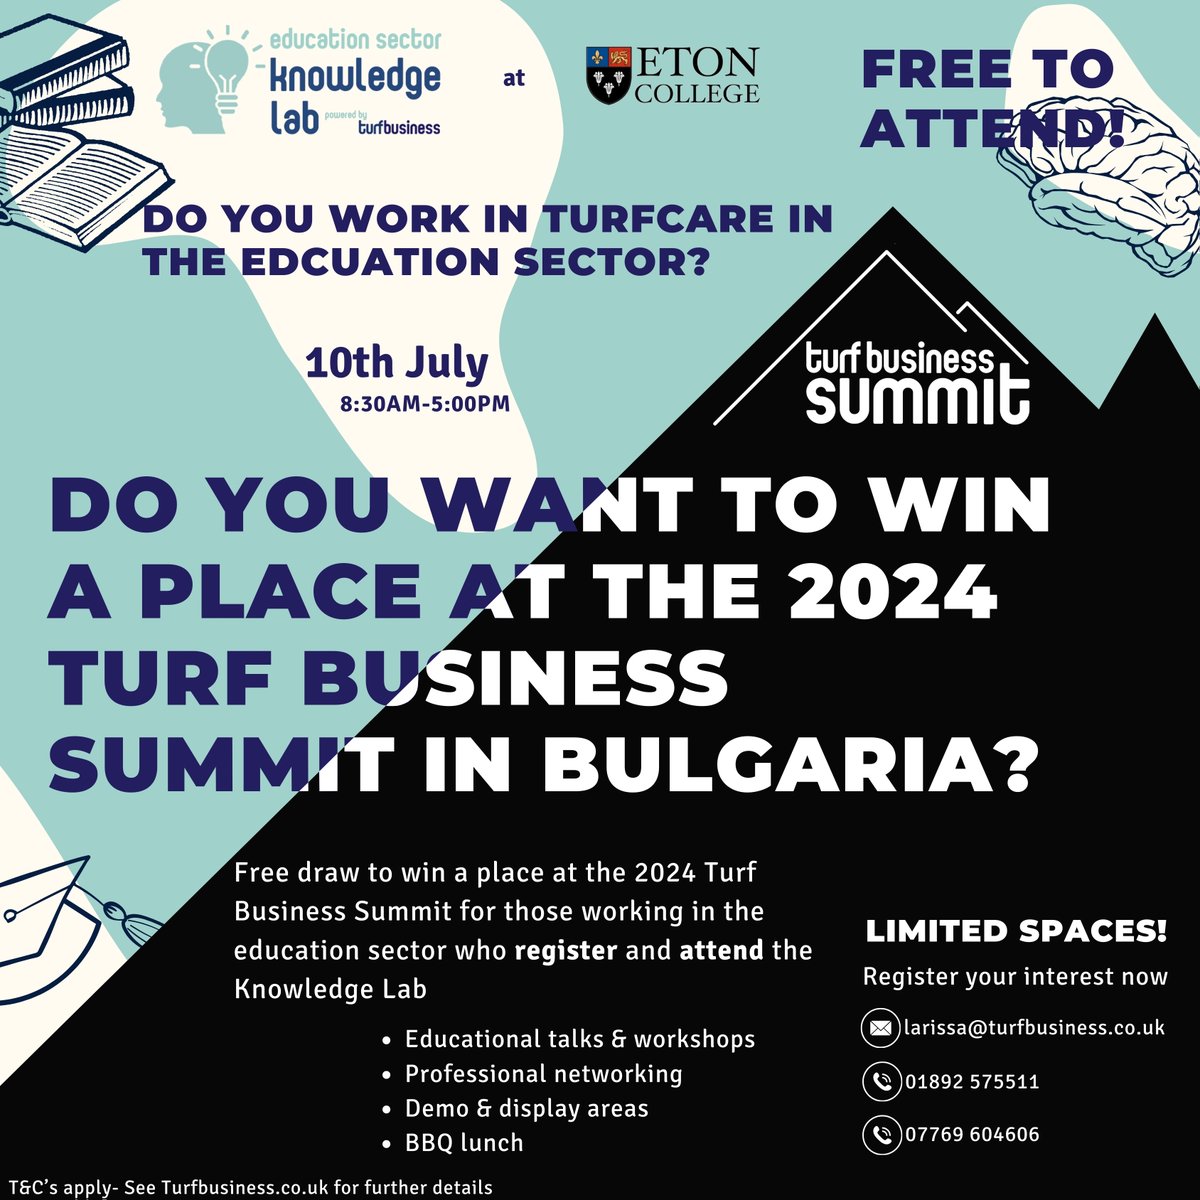 Work in Turfcare in the #education Sector & fancy winning yourself an exclusive spot in Bulgaria for the 2024 Turf Business Summit? 🇧🇬 If you haven't already registered for a spot to attend the Knowledge Lab, now is the time! Full T&C's can be found at turfbusiness.co.uk